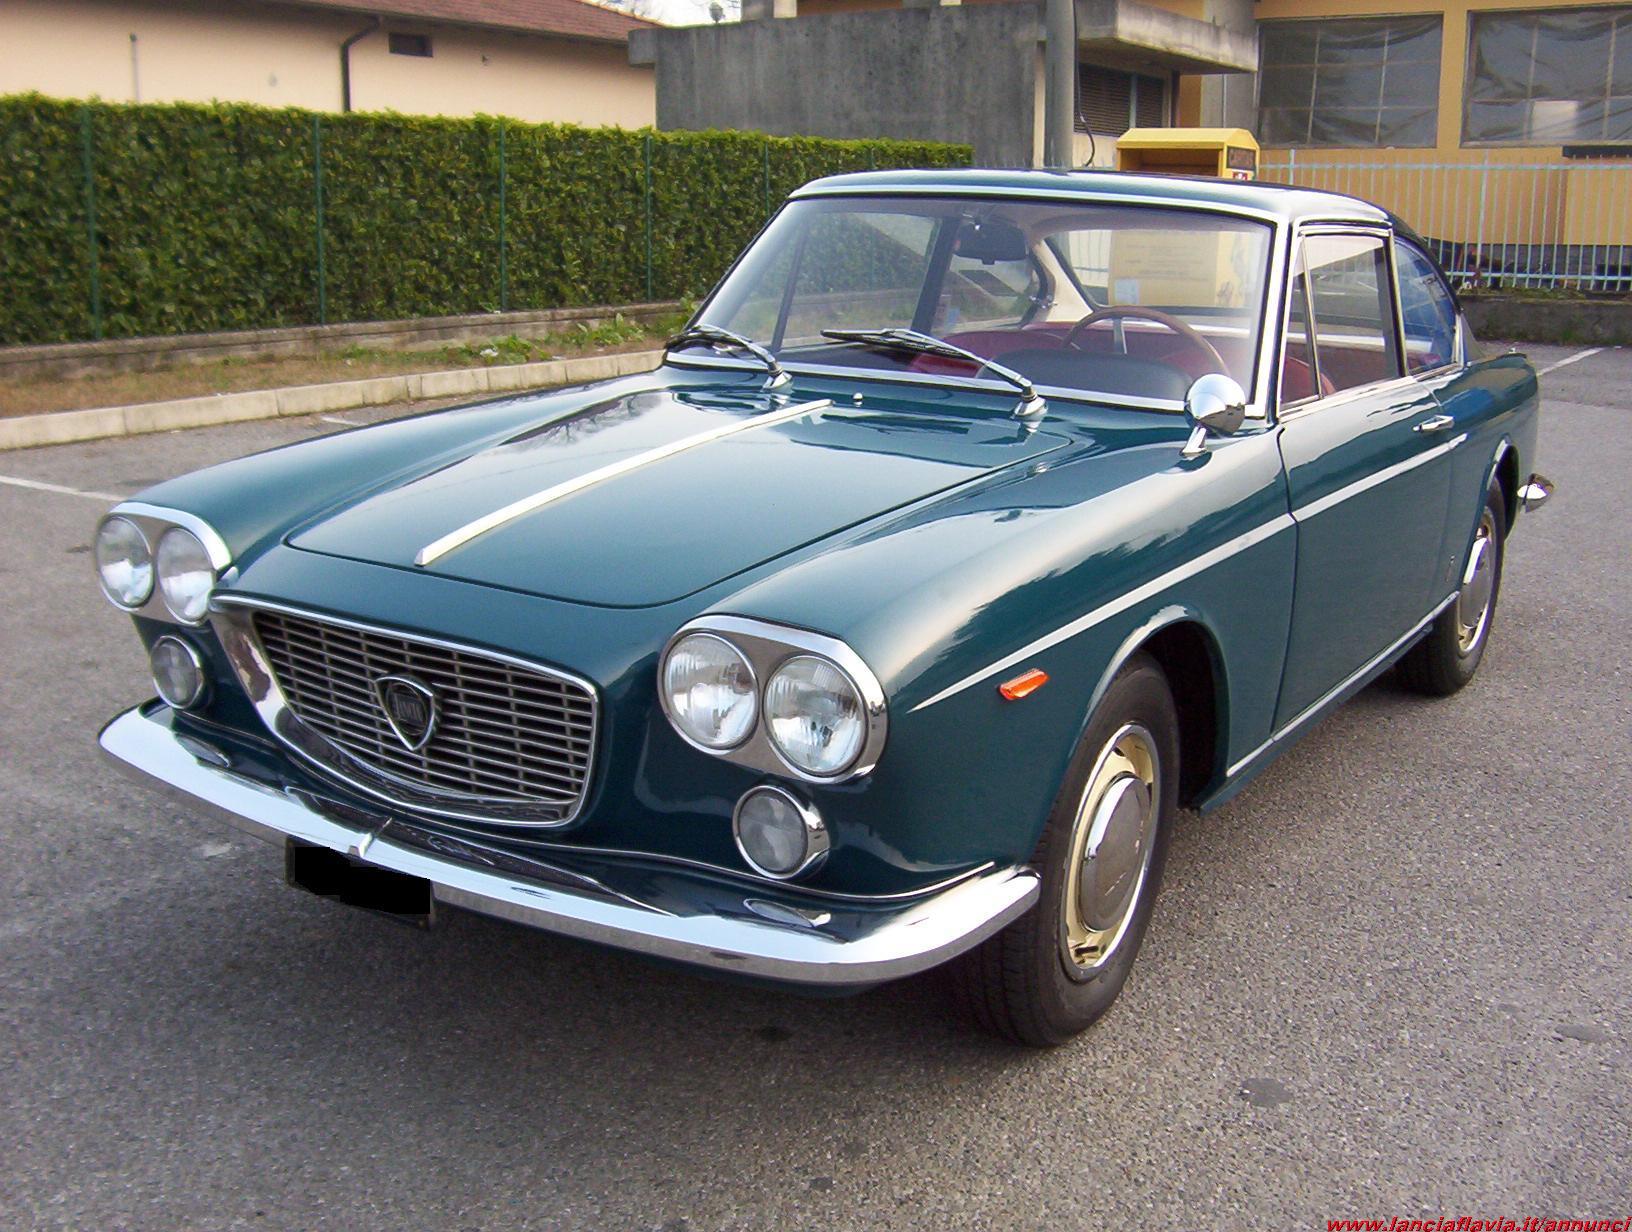 Nice Images Collection: Lancia Flavia Desktop Wallpapers